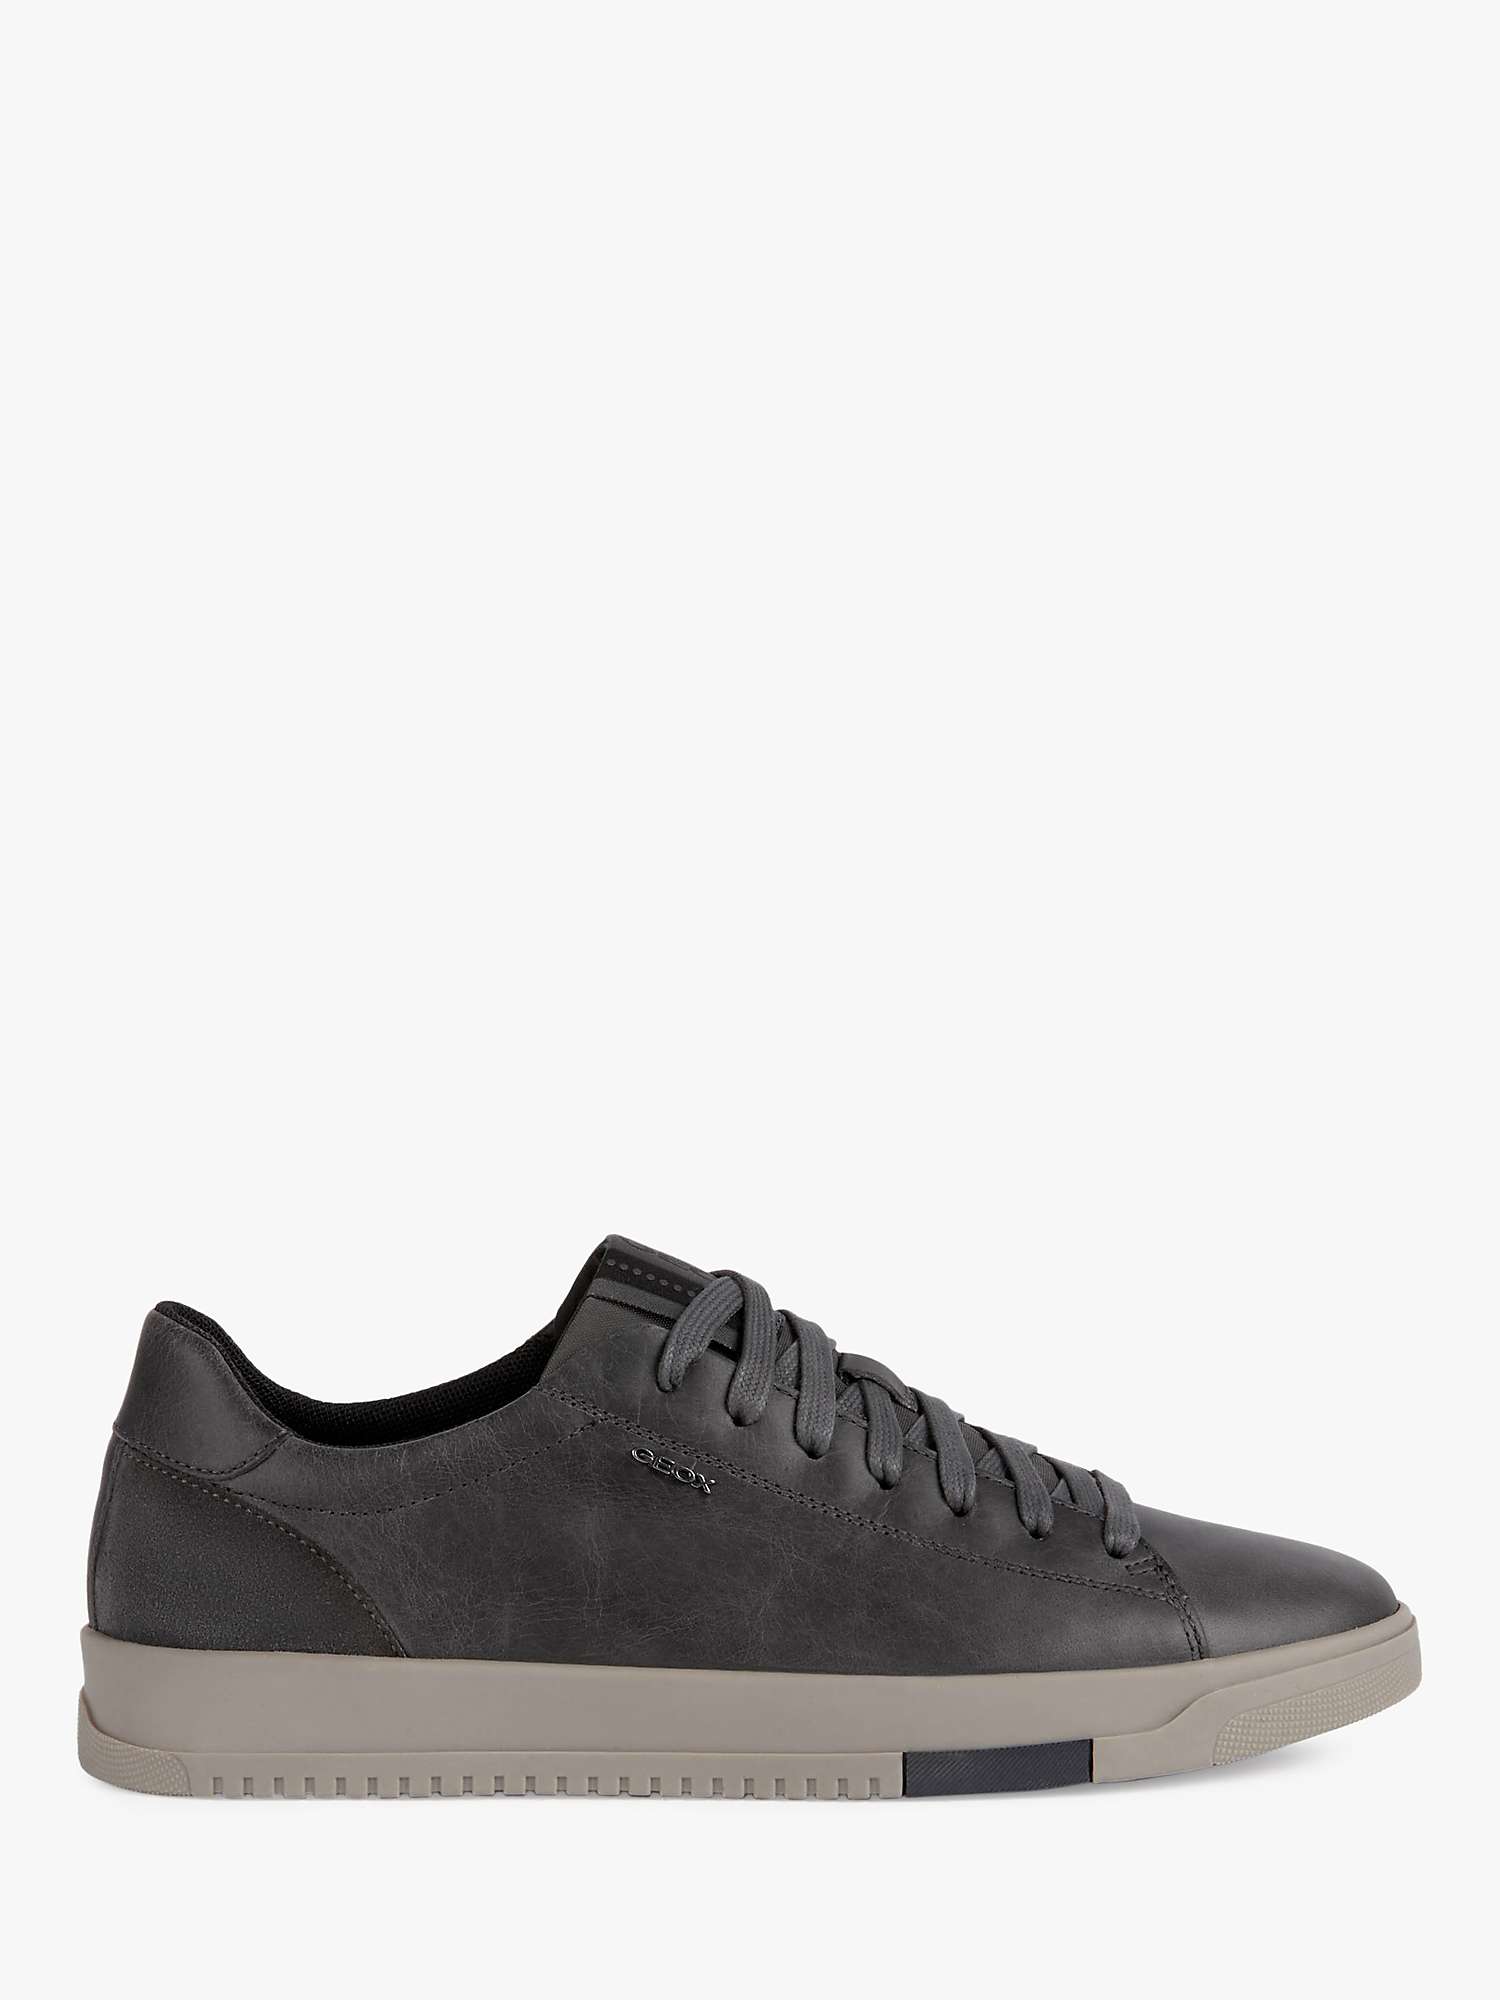 Buy Geox Segnale Leather Trainers Online at johnlewis.com